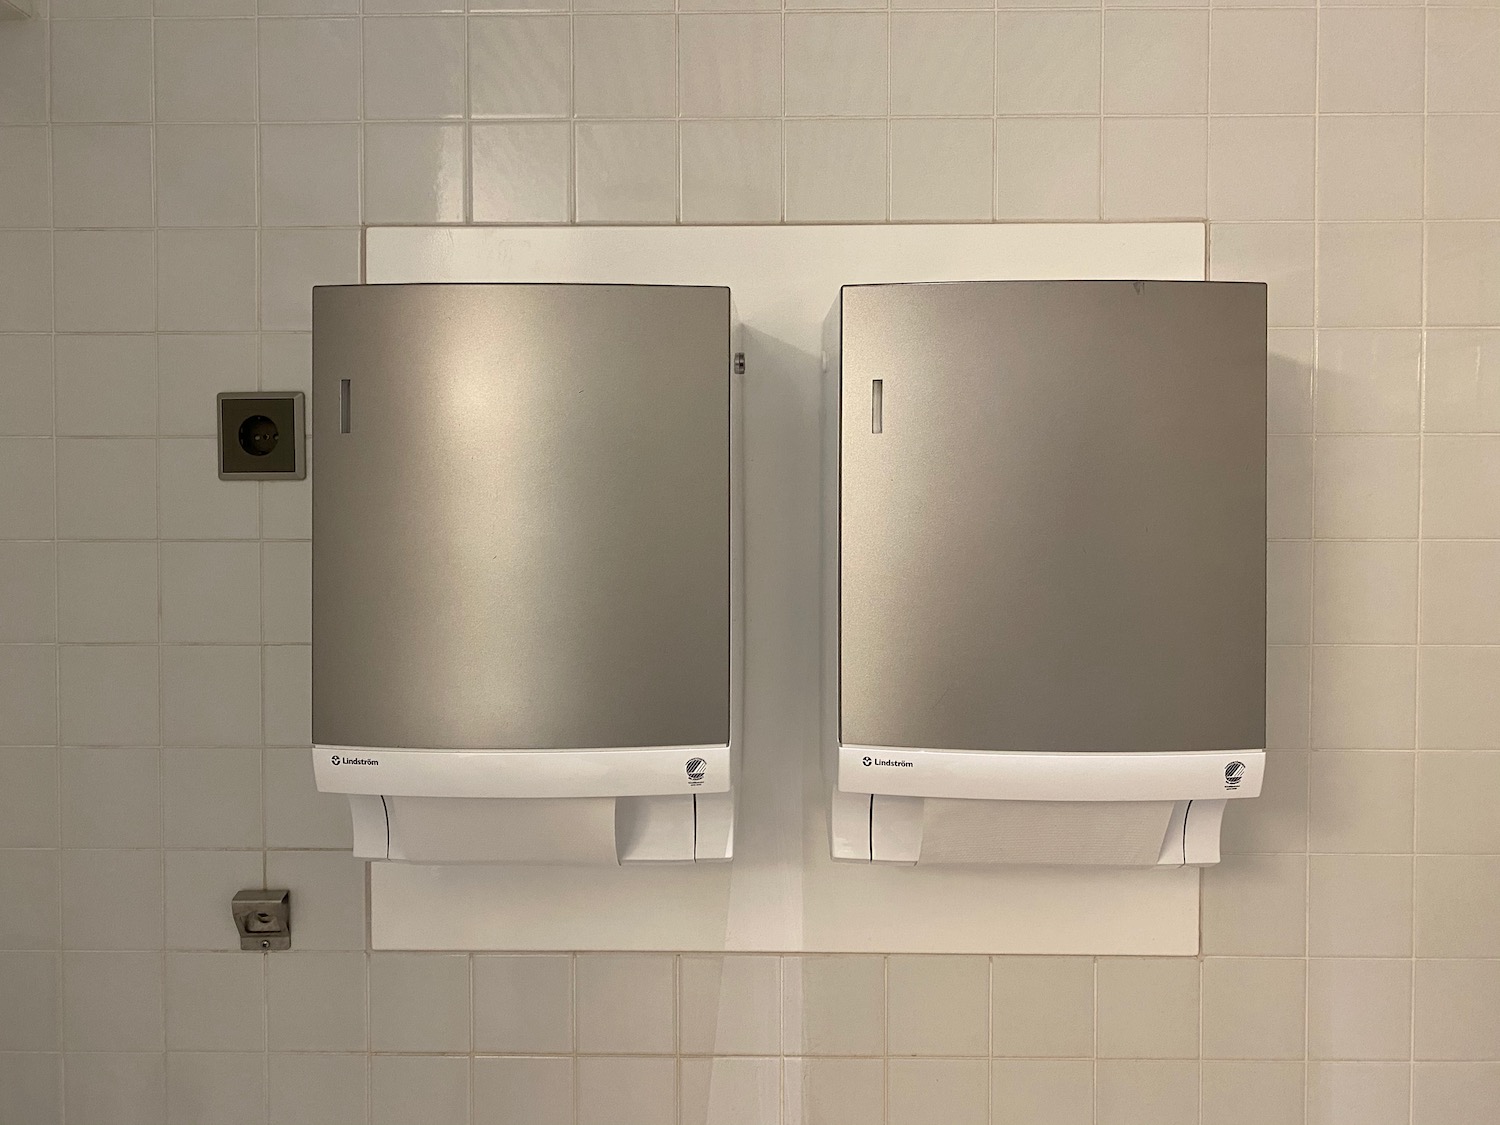 a paper towel dispensers on a wall